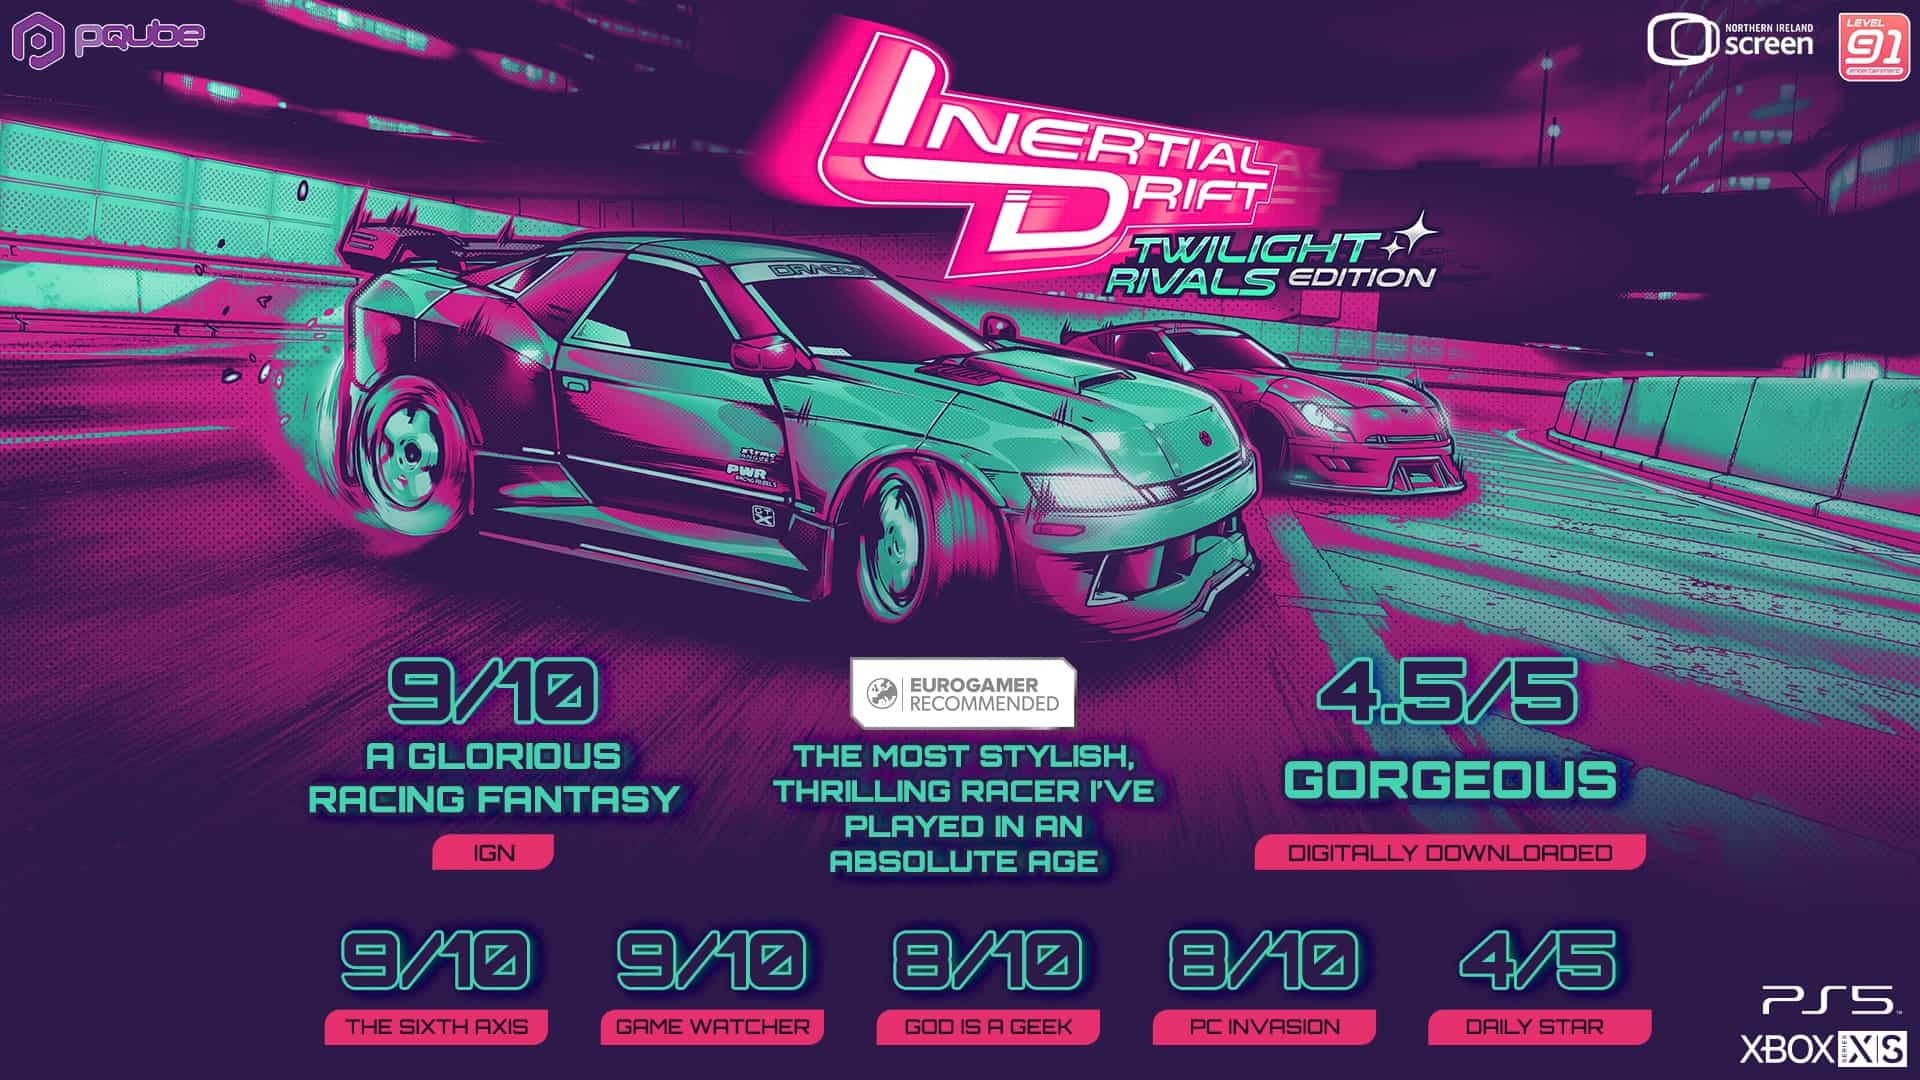 Inertial Drift: Twilight Rivals Edition has dropped after slight delay and we're so ready to get our drift on